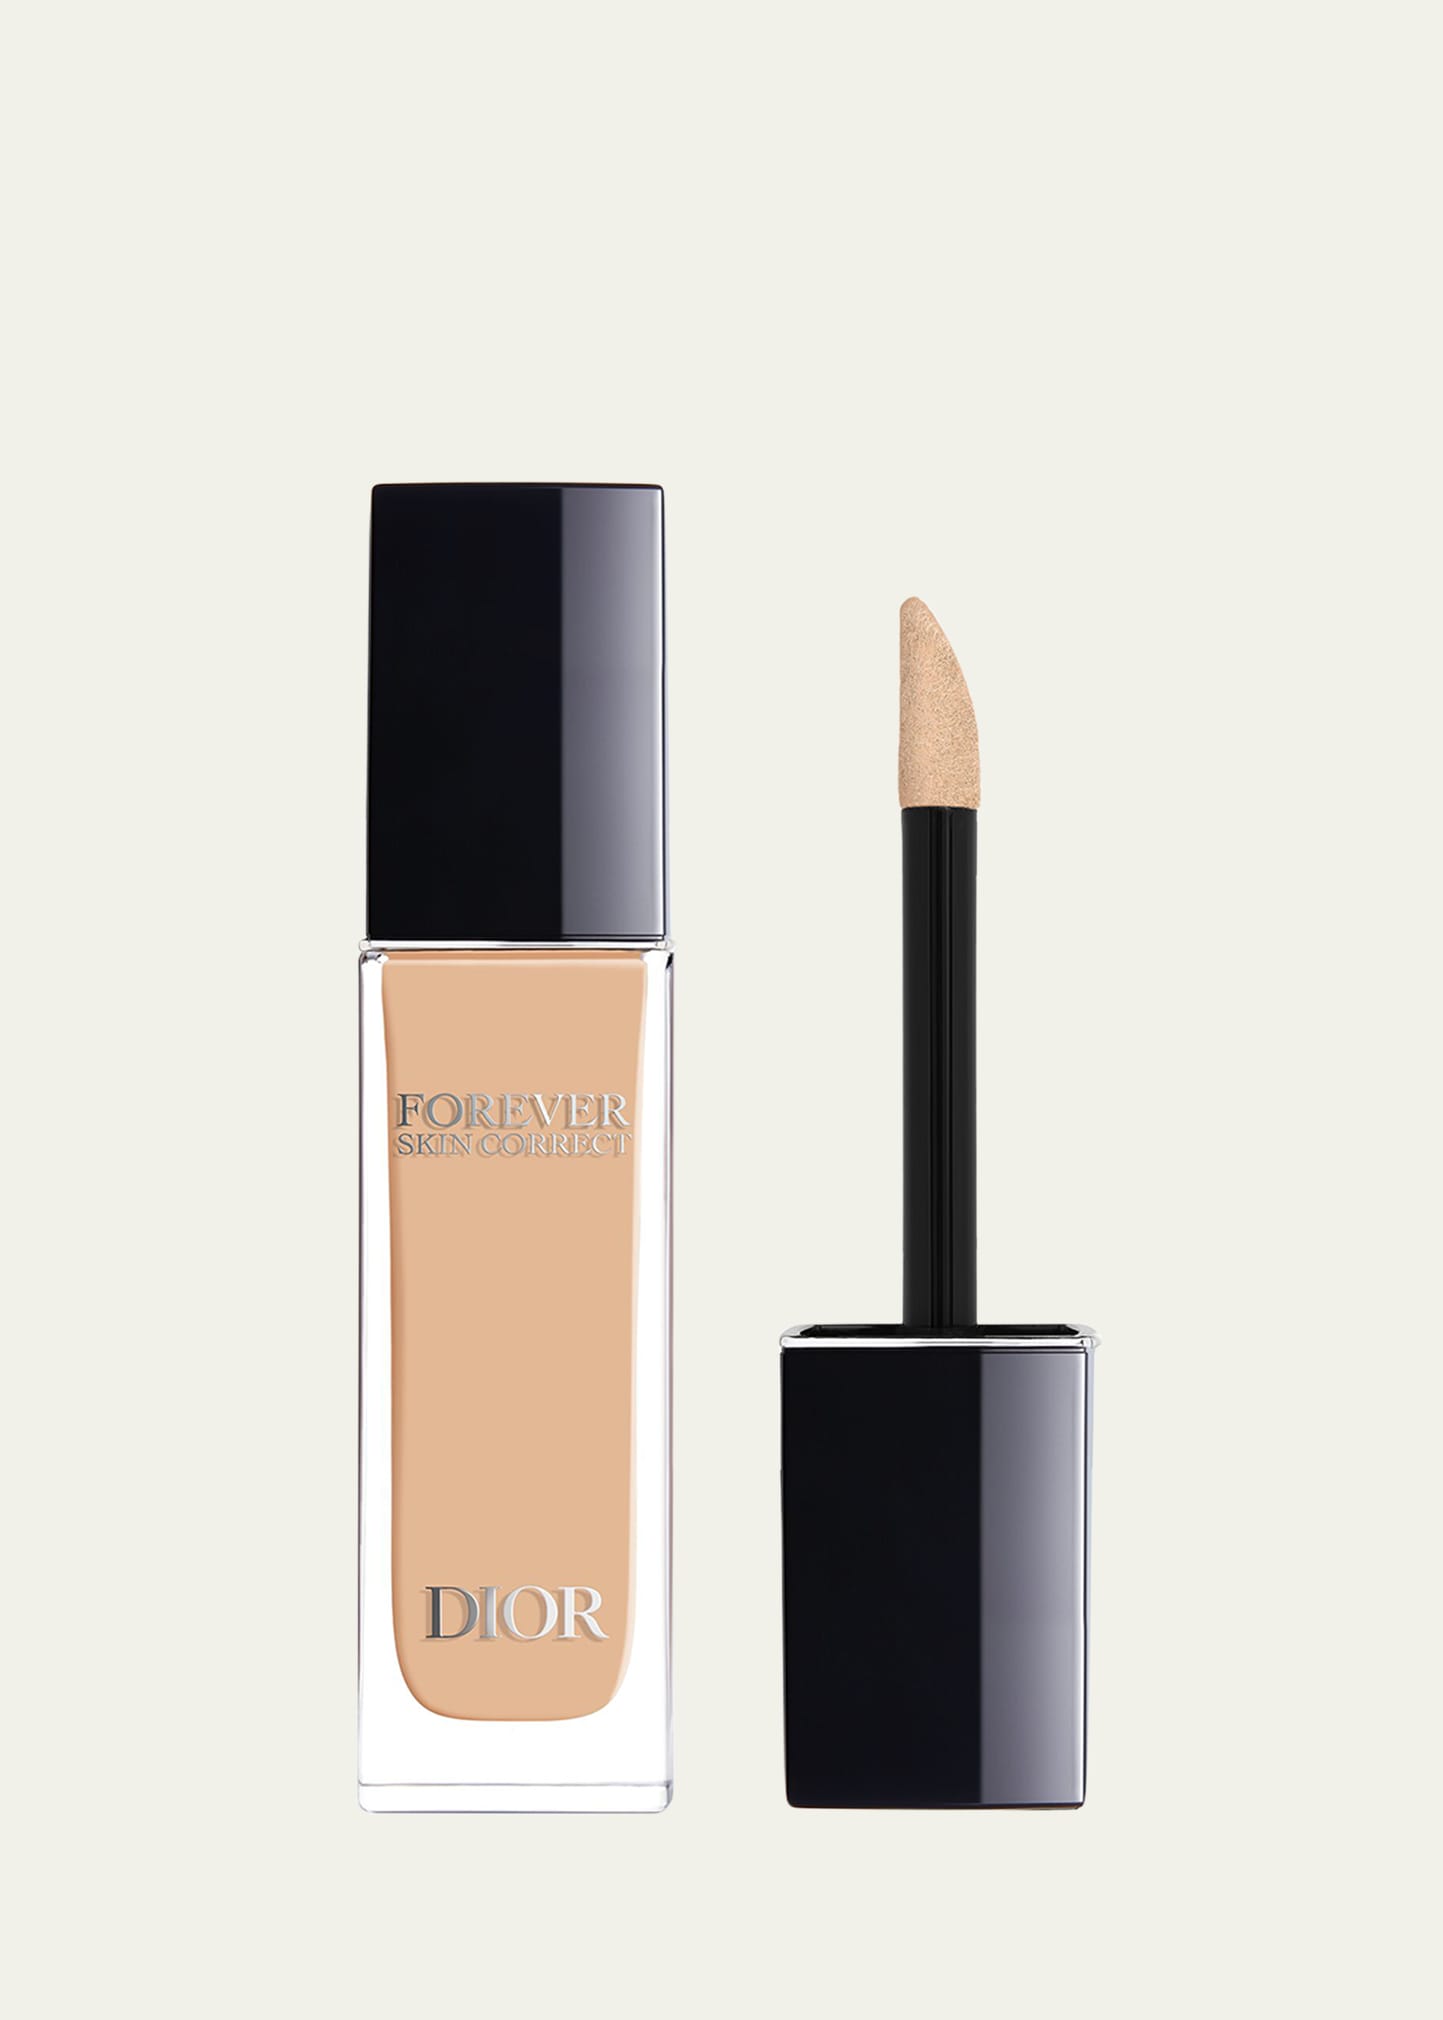 Dior Forever Skin Correct Full-coverage Concealer In 3 W Warm